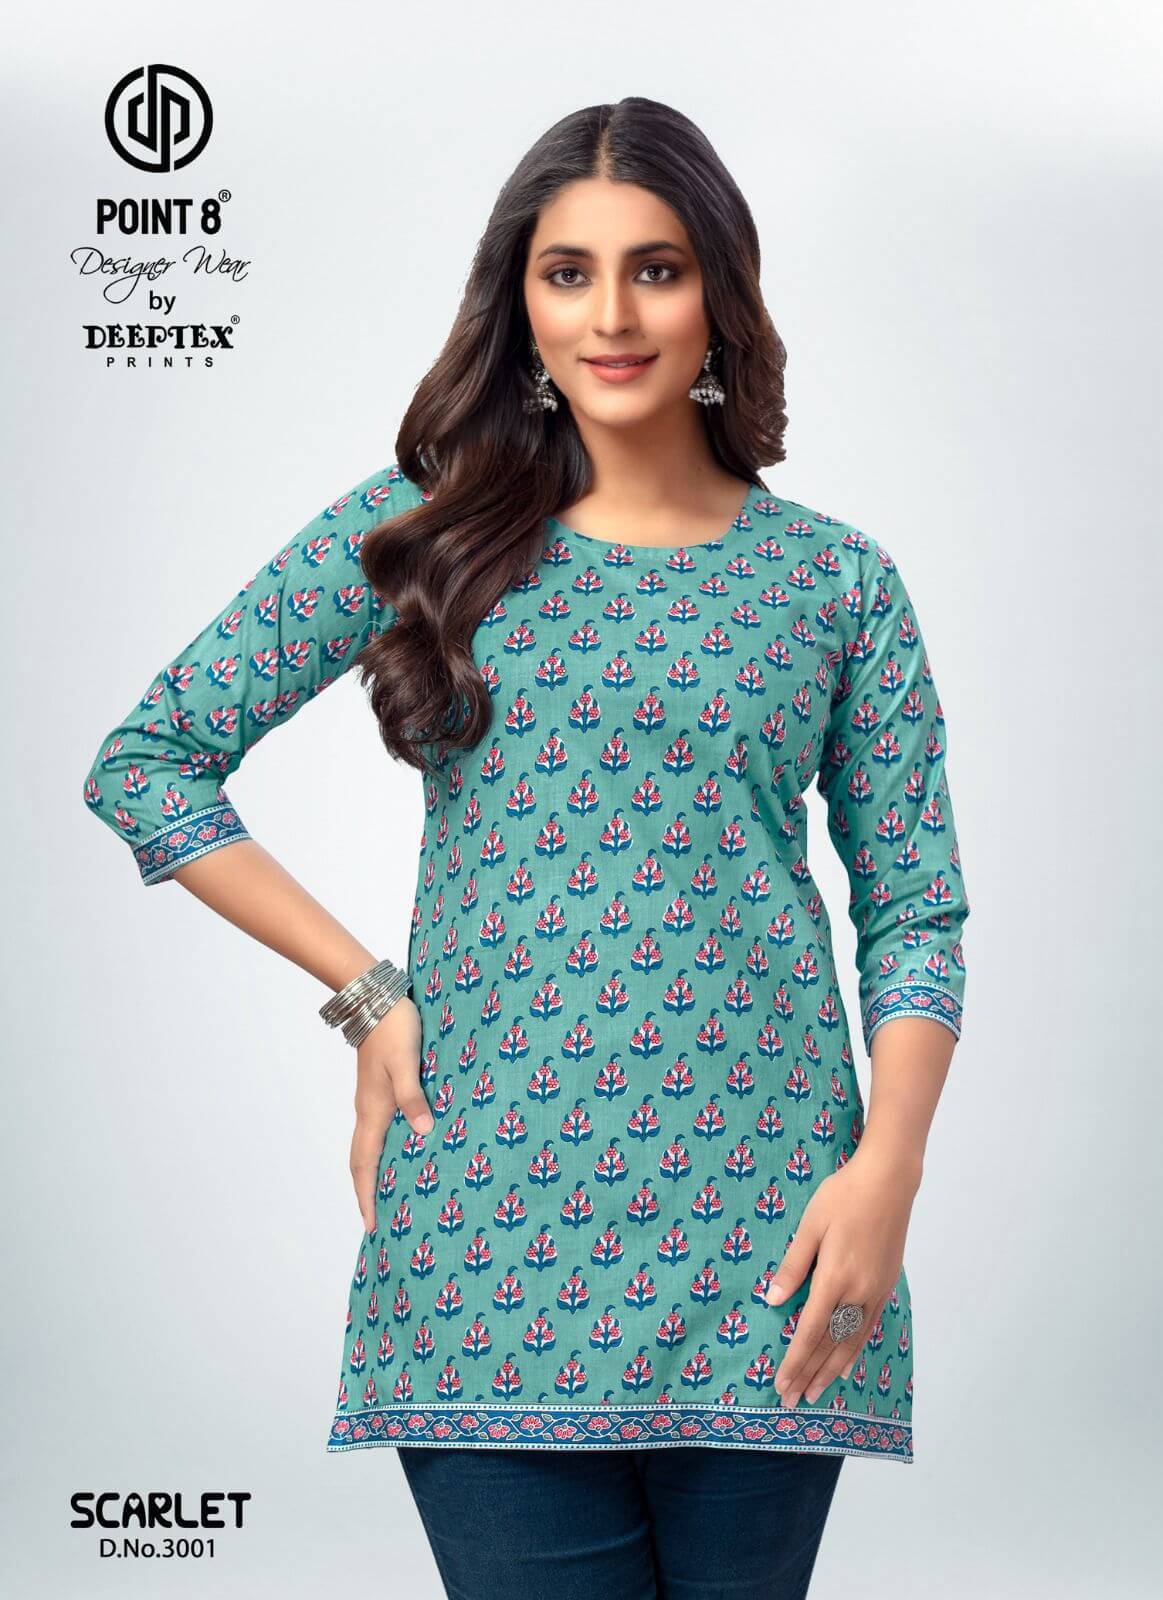 Deeptex Point 8 Scarlet Vol 3 Ladies Top Catalog collection 7